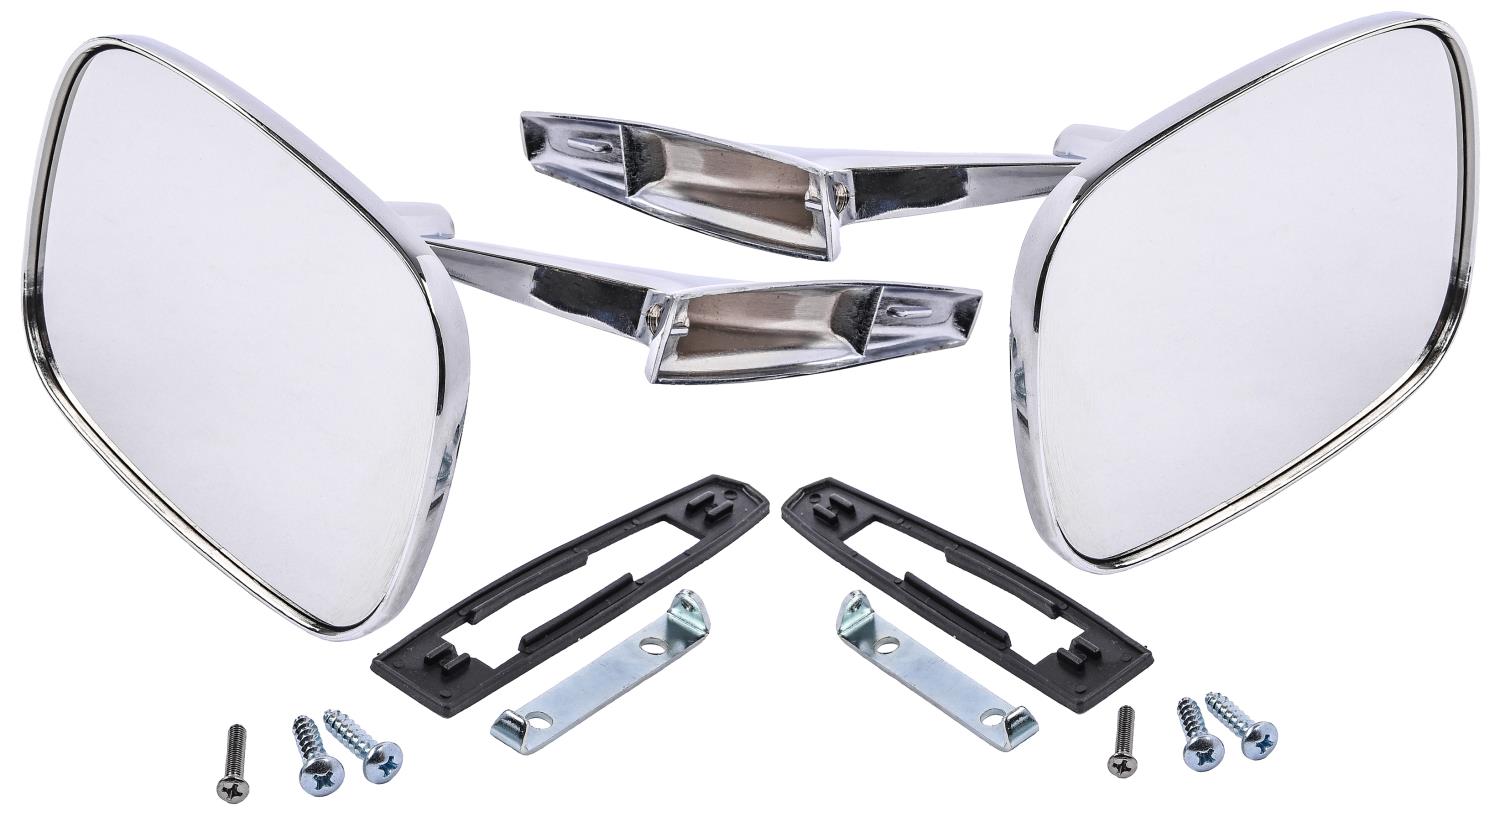 GM Side View Mirror Kit for 1968-1972 GM